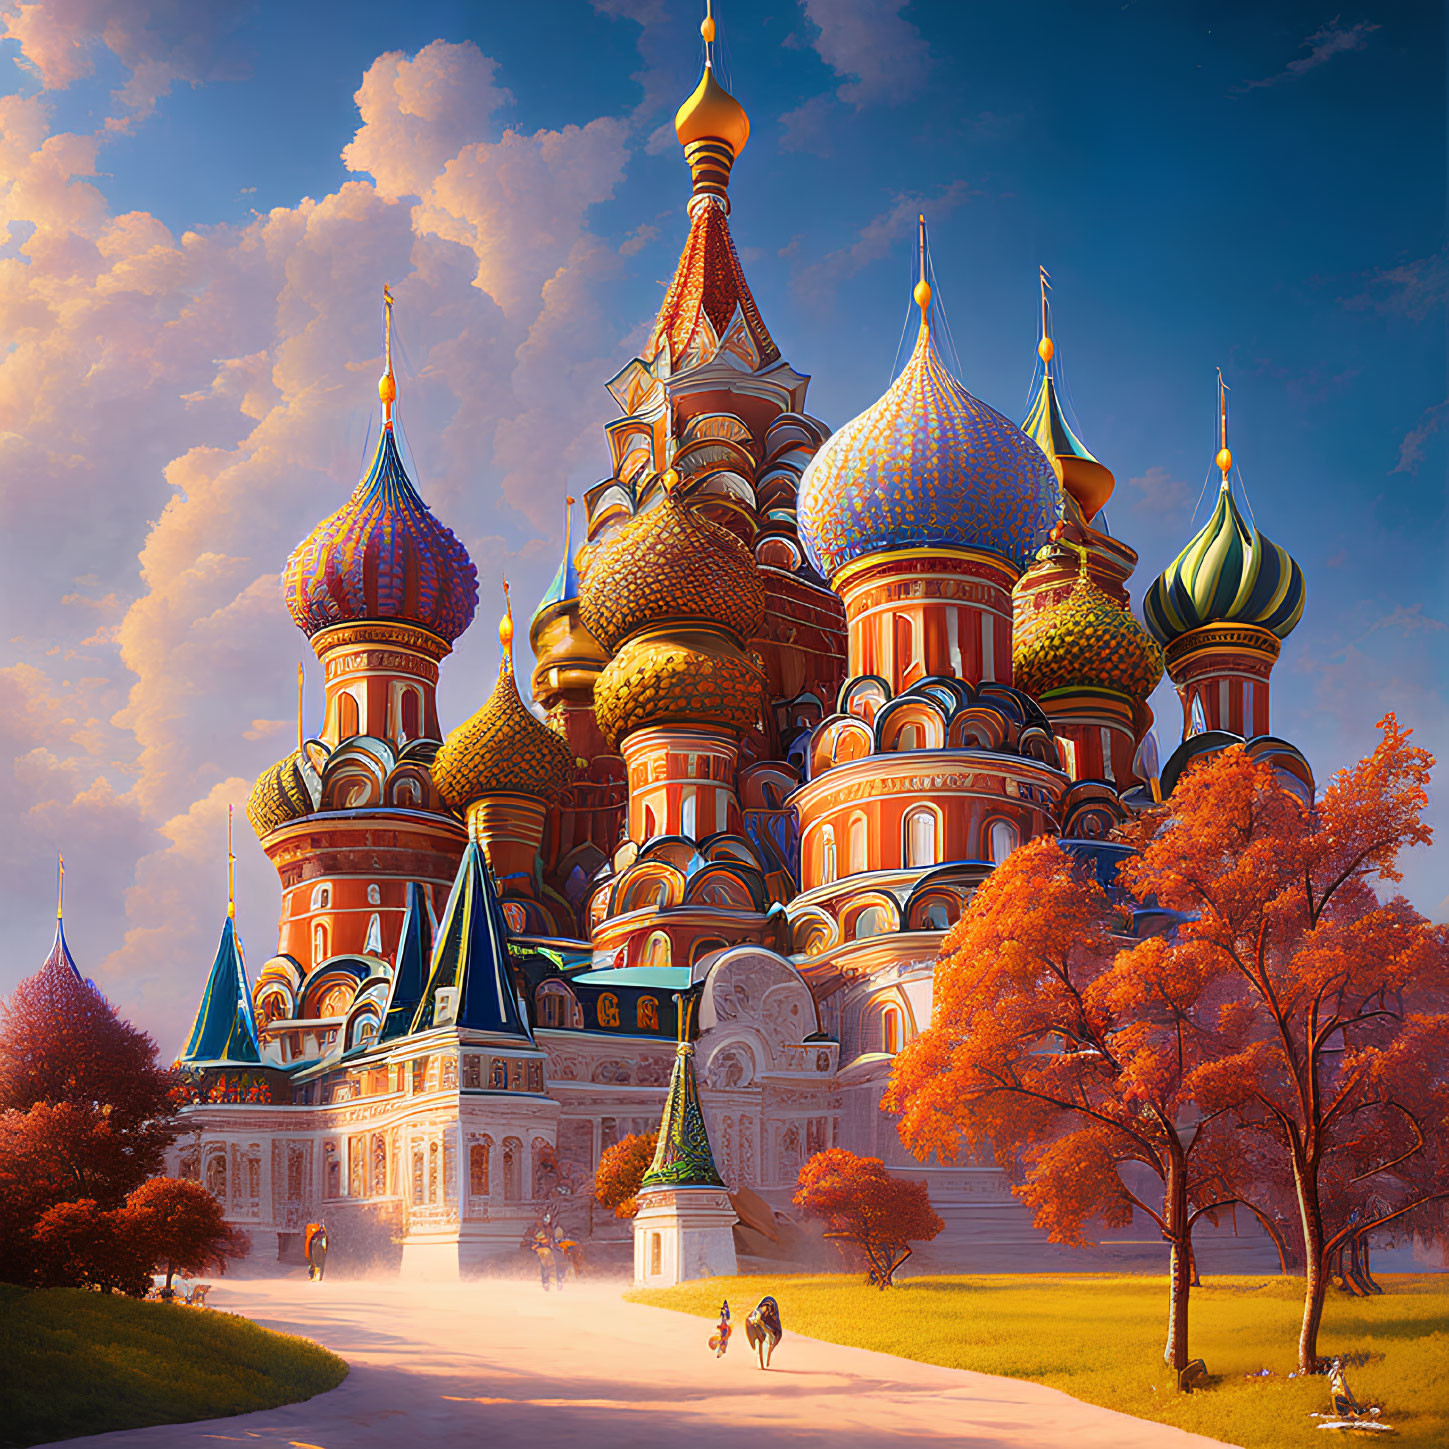 Iconic Saint Basil's Cathedral illustration with colorful domes, autumn trees, and a couple walking